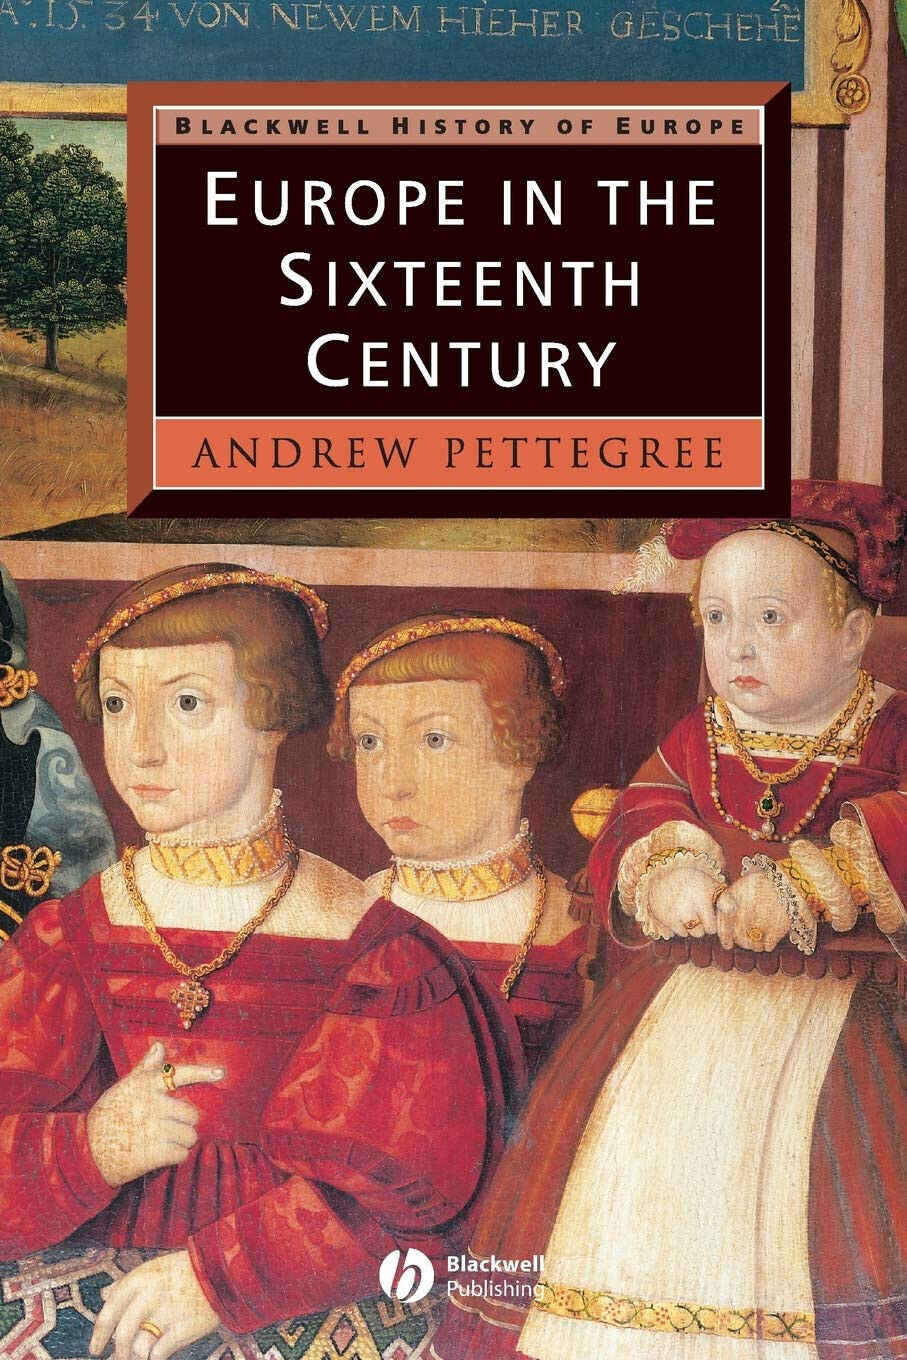 Europe in the Sixteenth Centur - Pettegree - John Wiley & Sons, 2011 libro usato